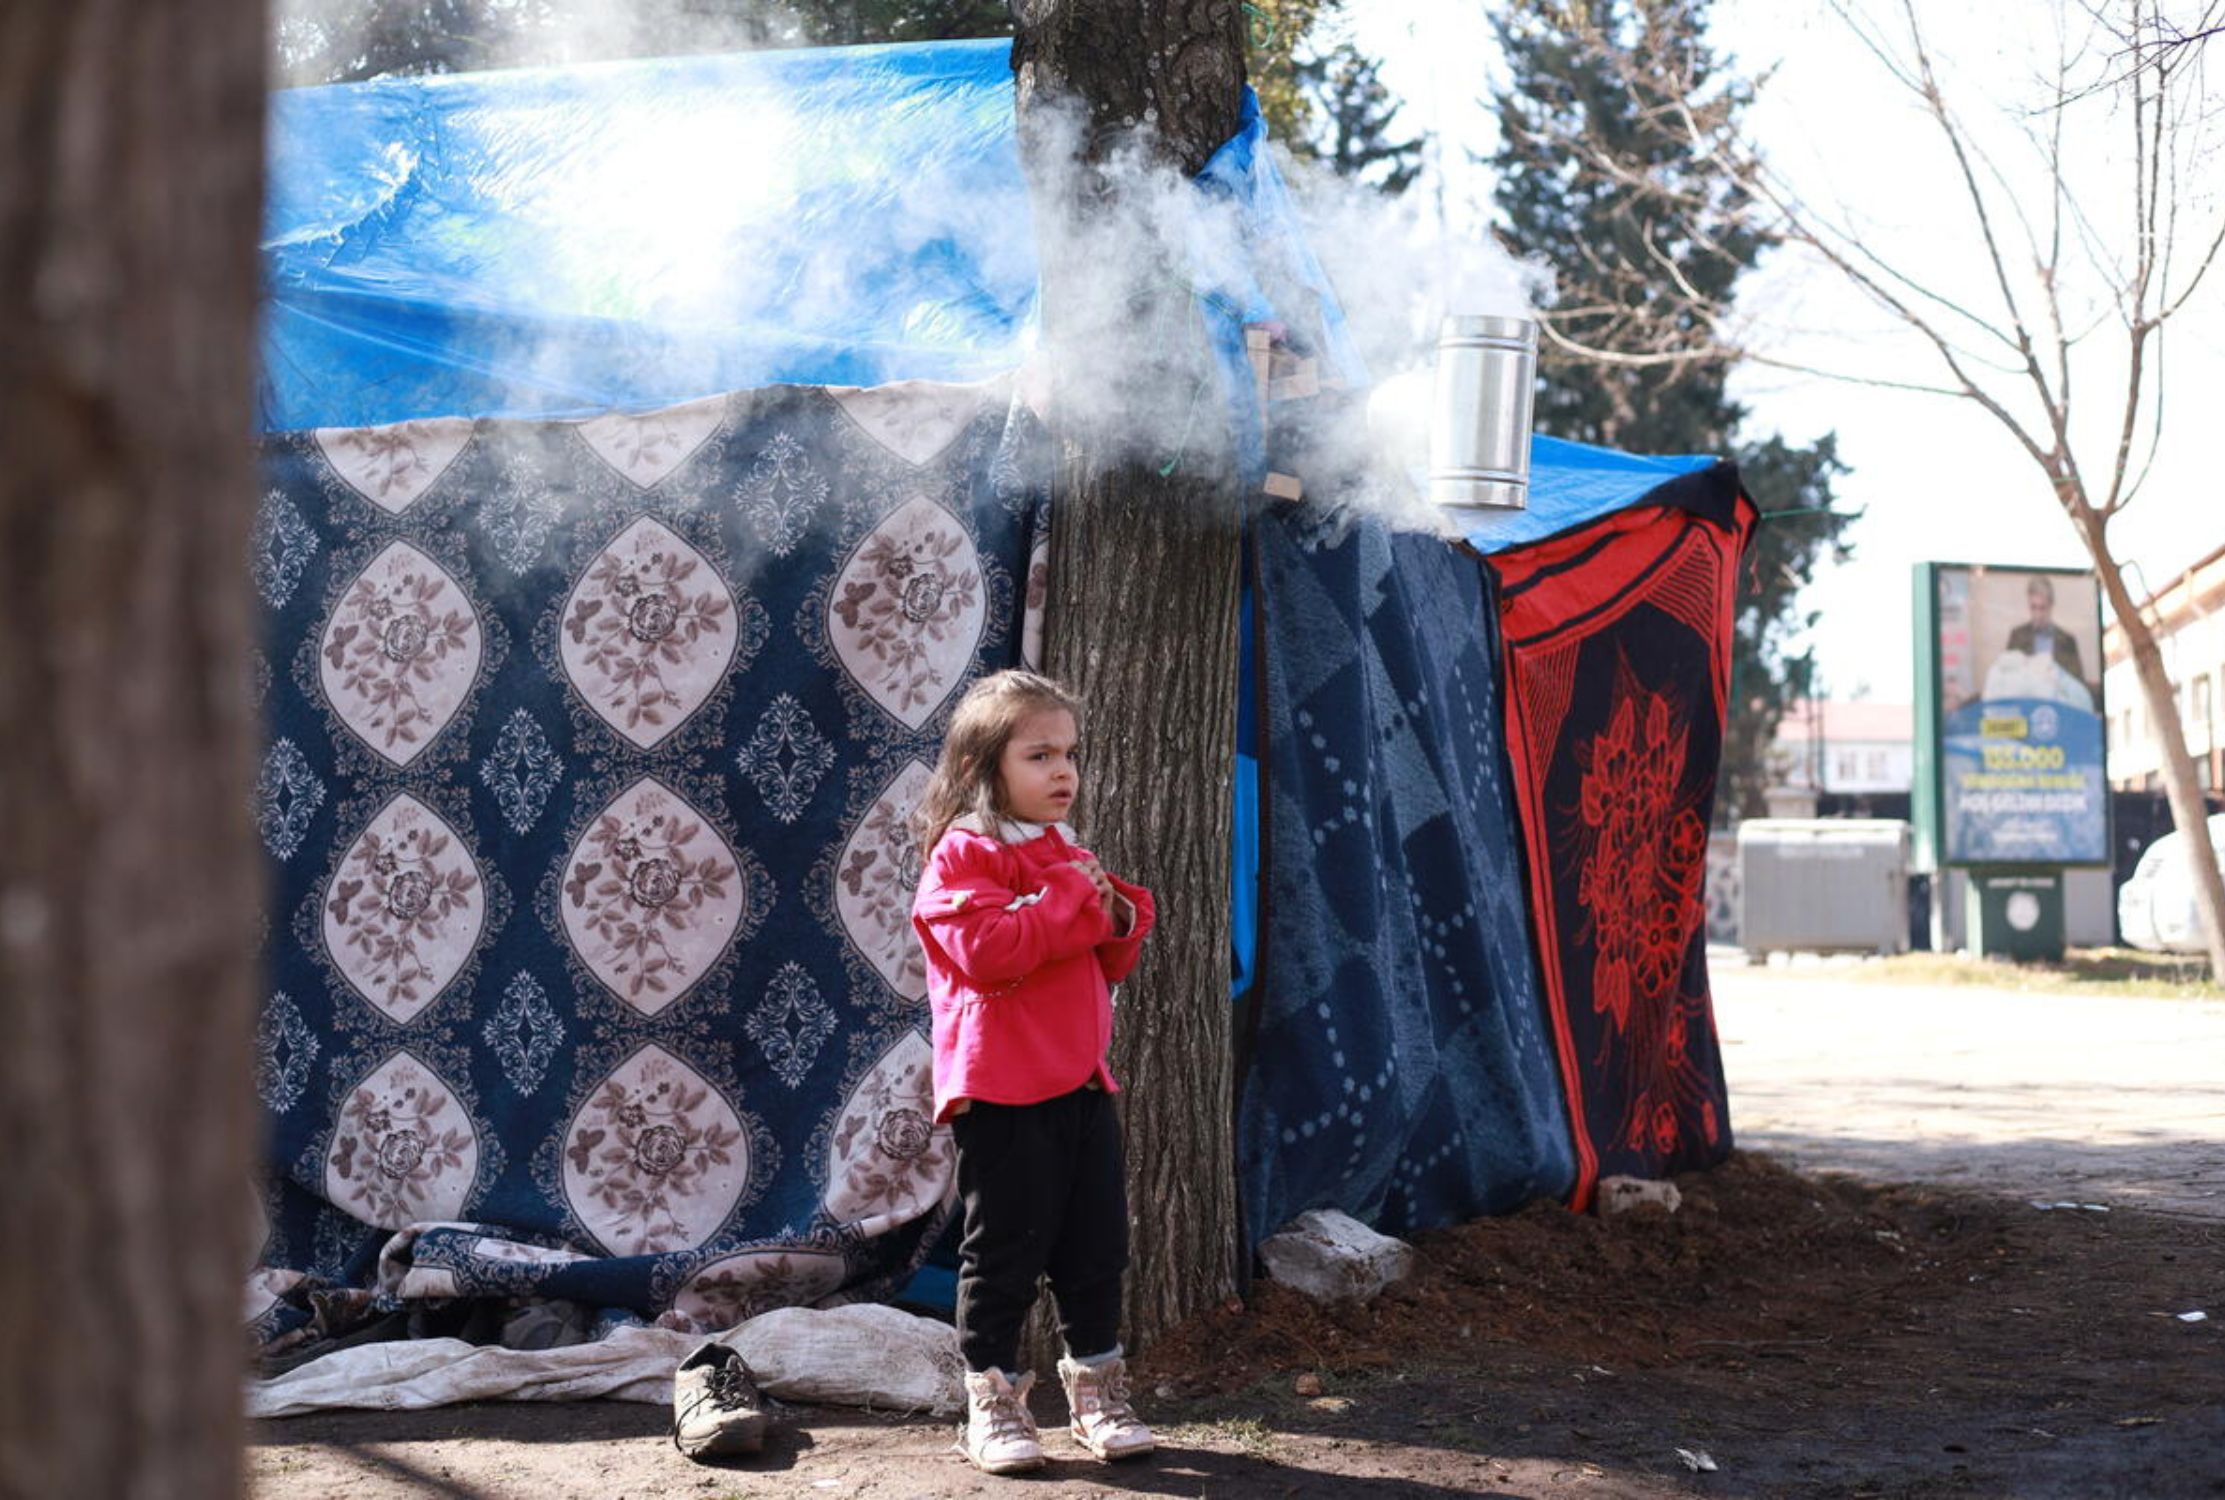 Girl child standing next to temporary shelters in Turkey